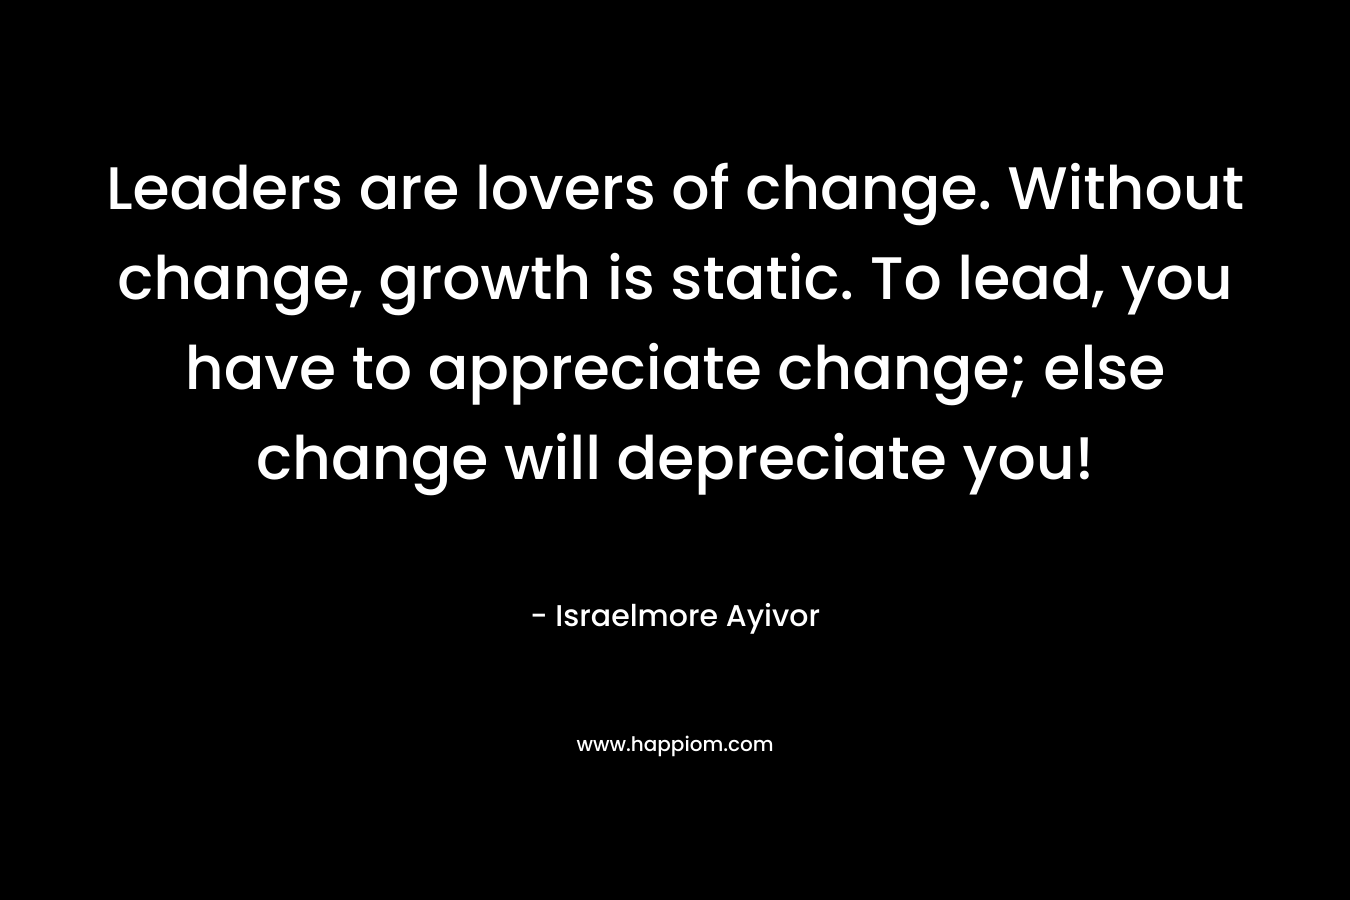 Leaders are lovers of change. Without change, growth is static. To lead, you have to appreciate change; else change will depreciate you!